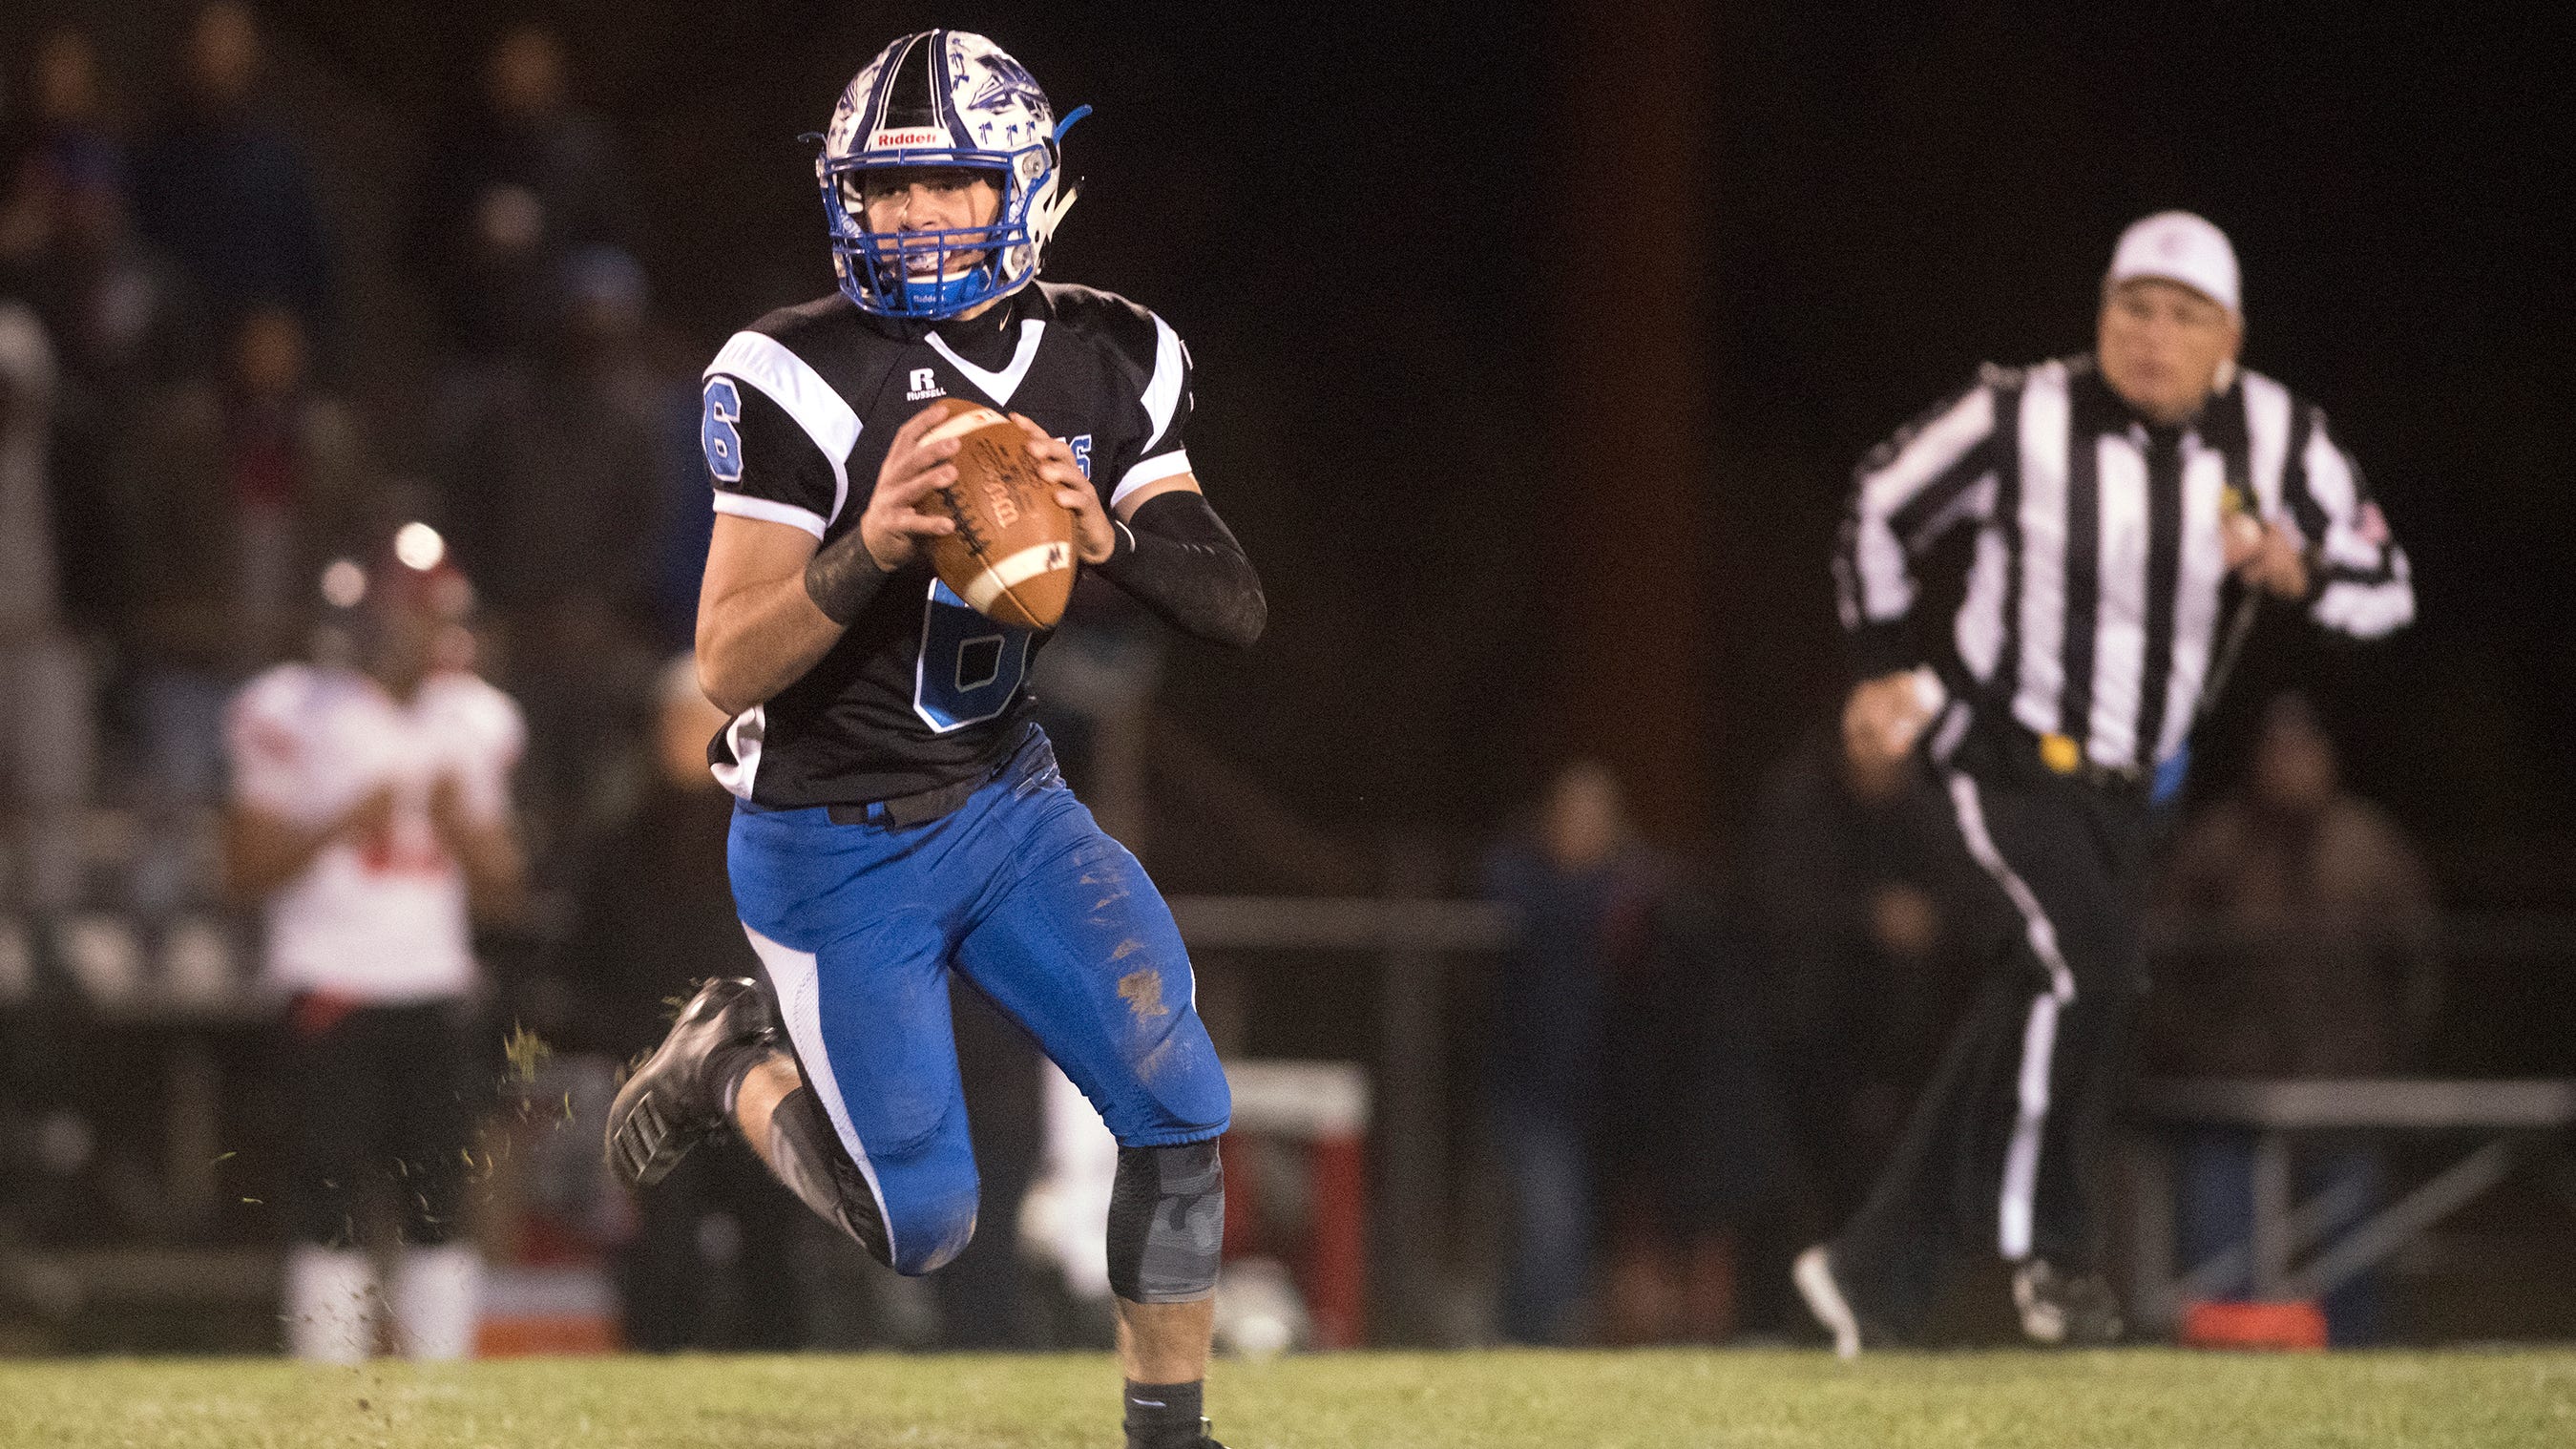 NJ football: Games to watch, schedules across the state in Week 1